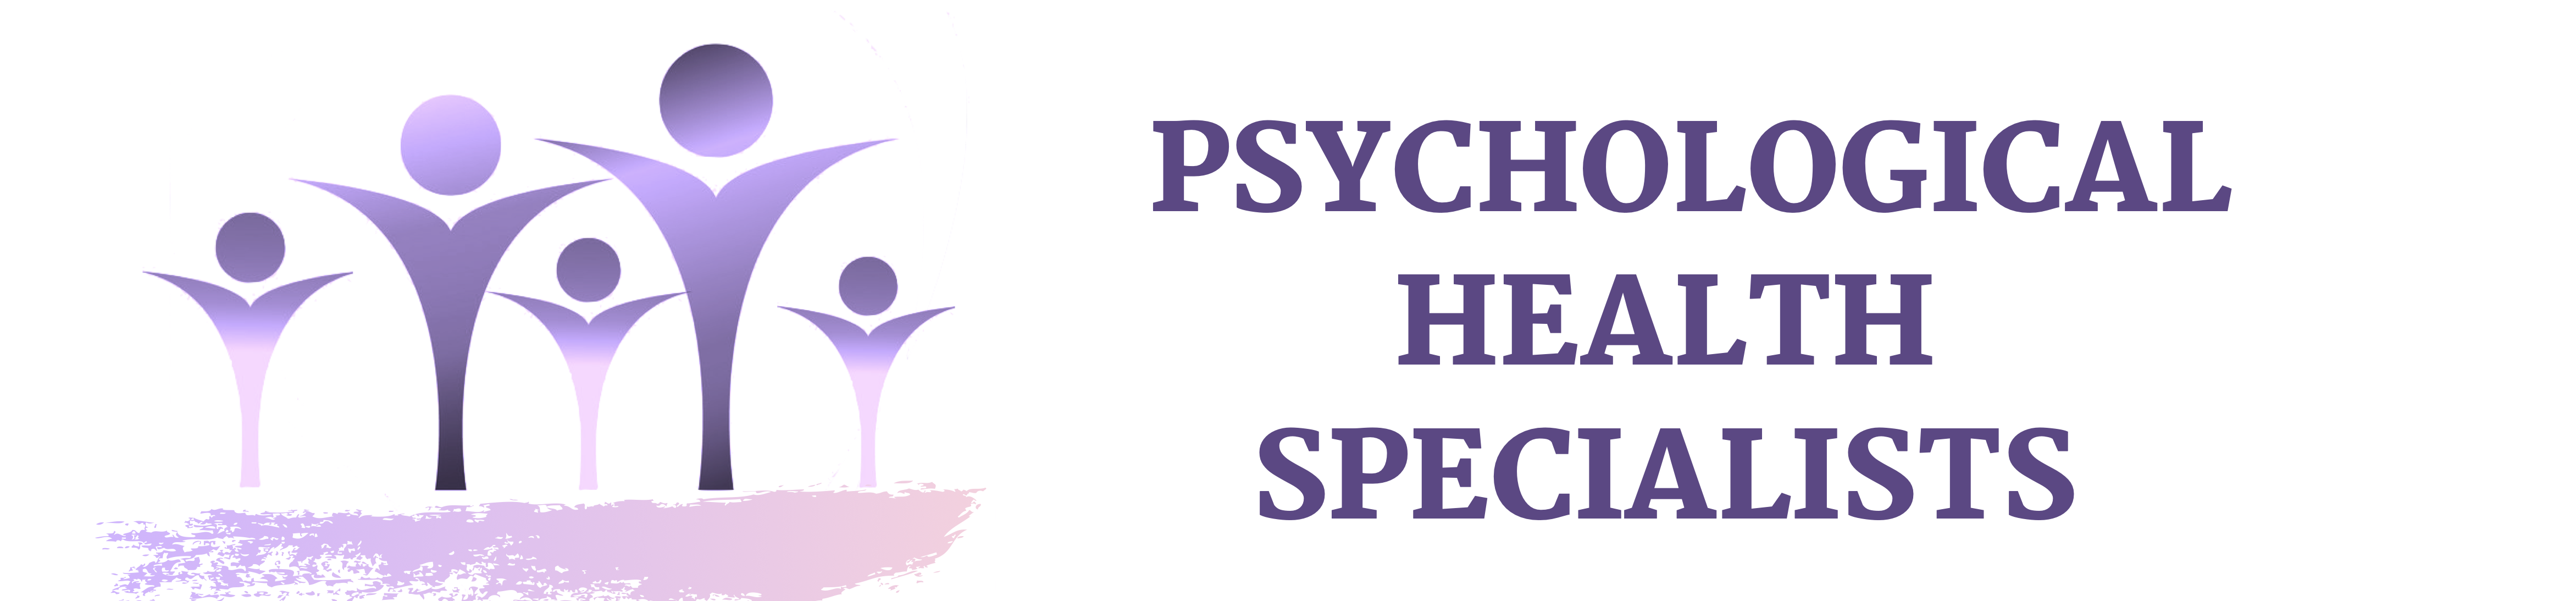 Psychological Health Specialists